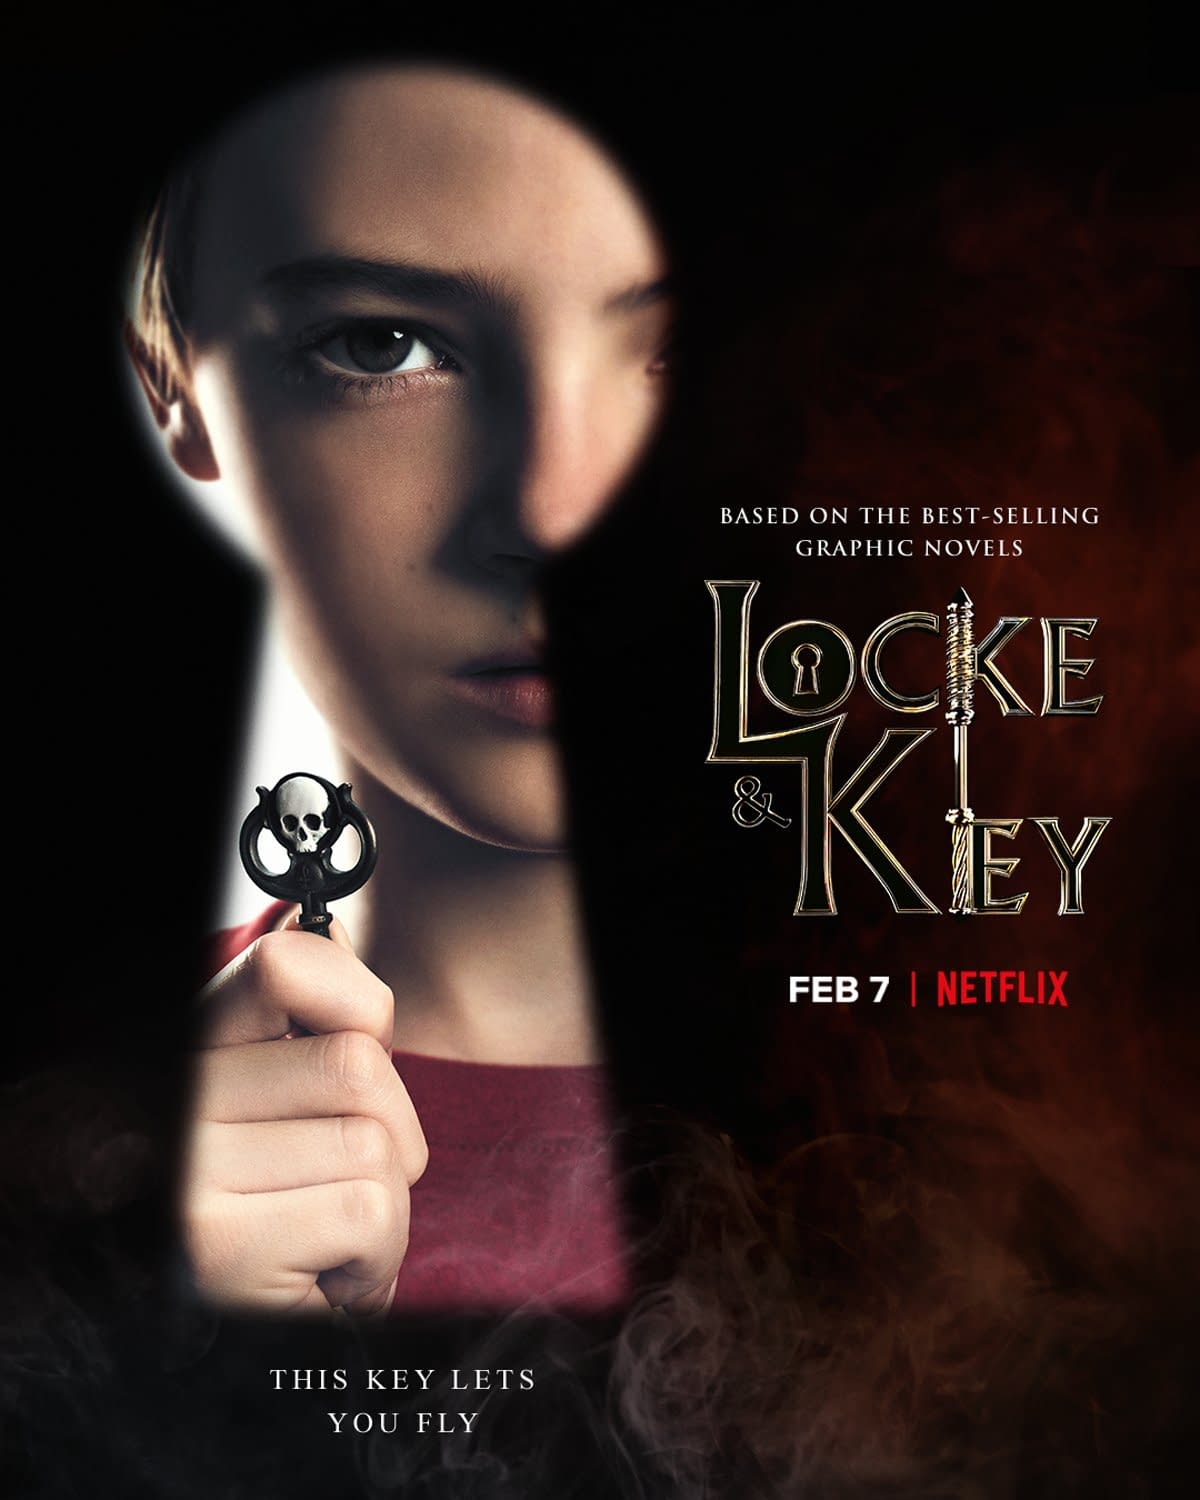 "Locke &#038; Key" Cast Offers Viewers Behind-the-Scenes "Welcome to Keyhouse" [VIDEO]